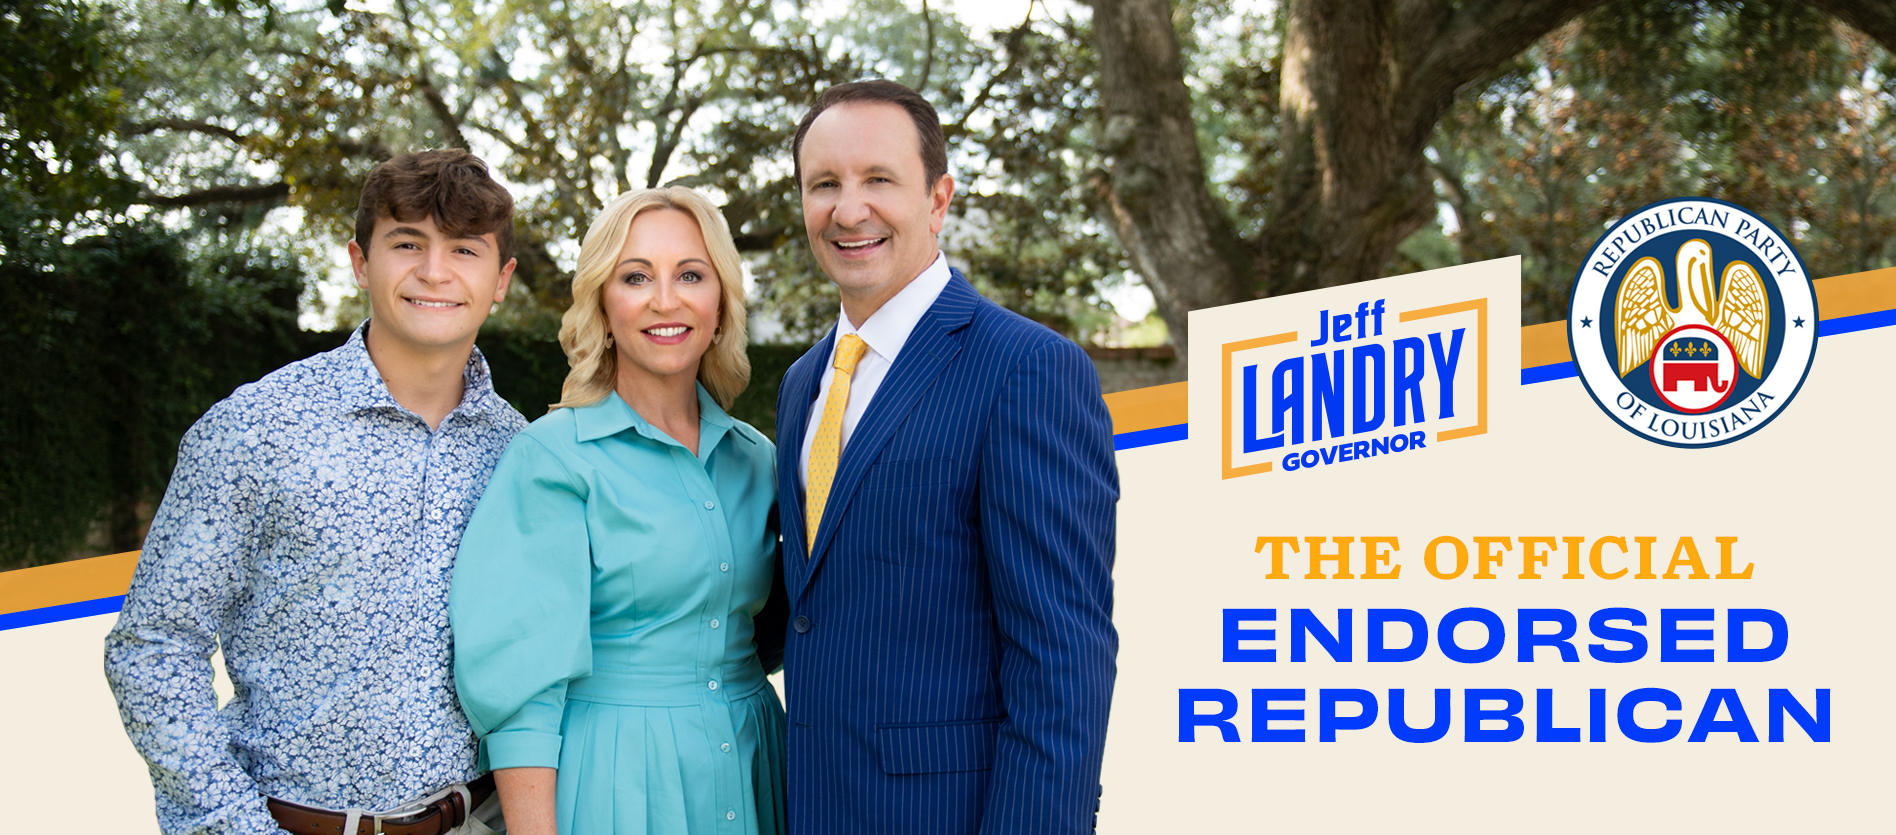 Jeff Landry - The Official Endorsed Republican